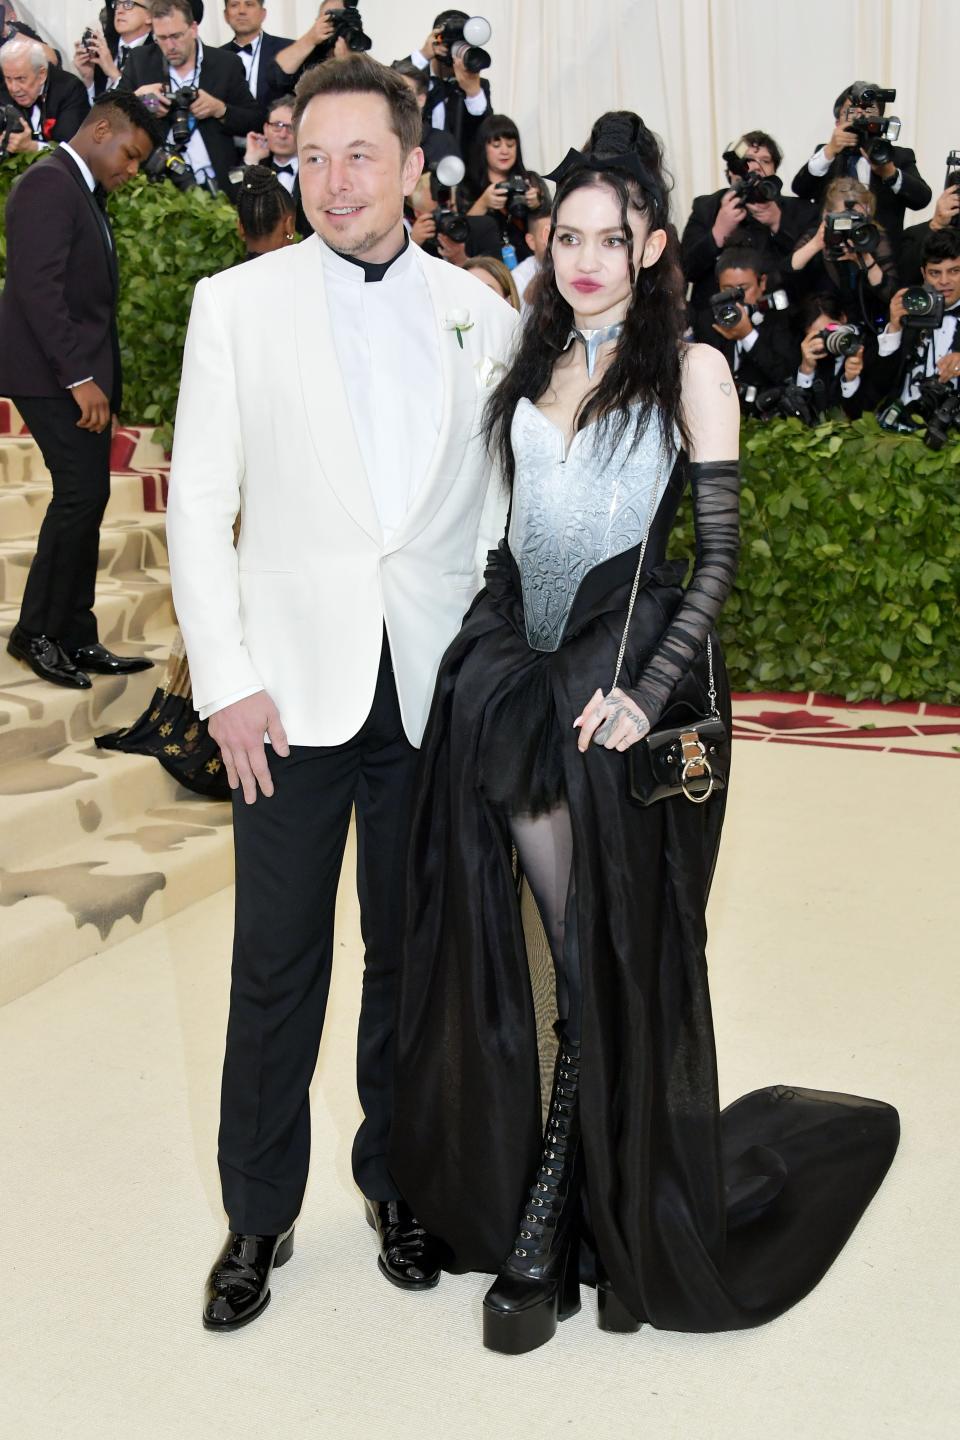 Elon Musk and Grimes standing together at the 2018 Met Gala. Musk is wearing a white blazer and Grimes is wearing a long dress with a black skirt.